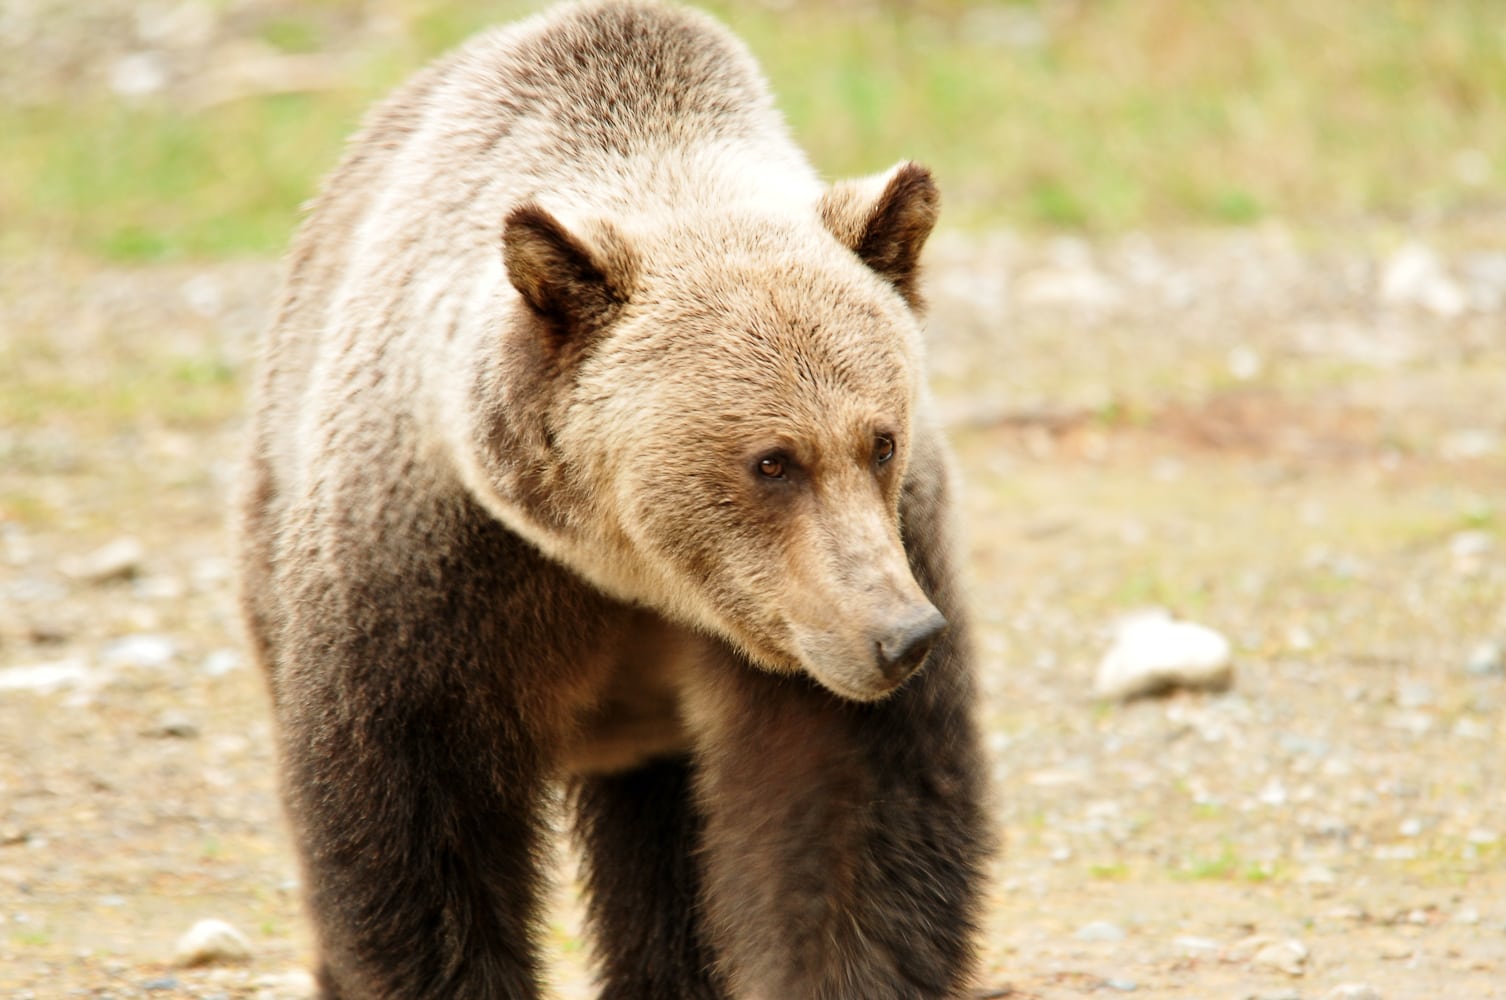 A young grizzly bear at Wild Bear Lodge